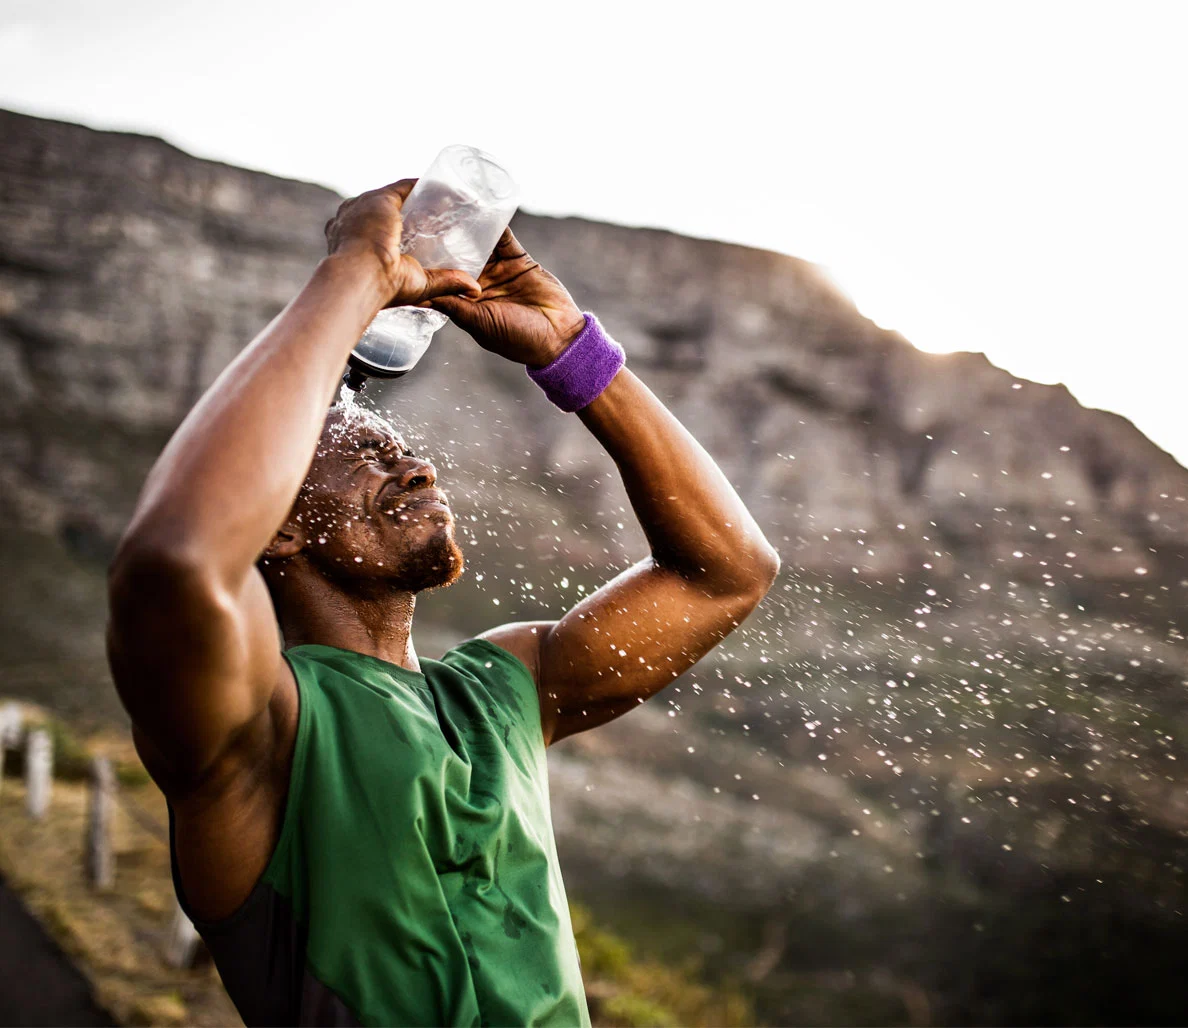 A guy is pouring water on himself after exercising in the sun